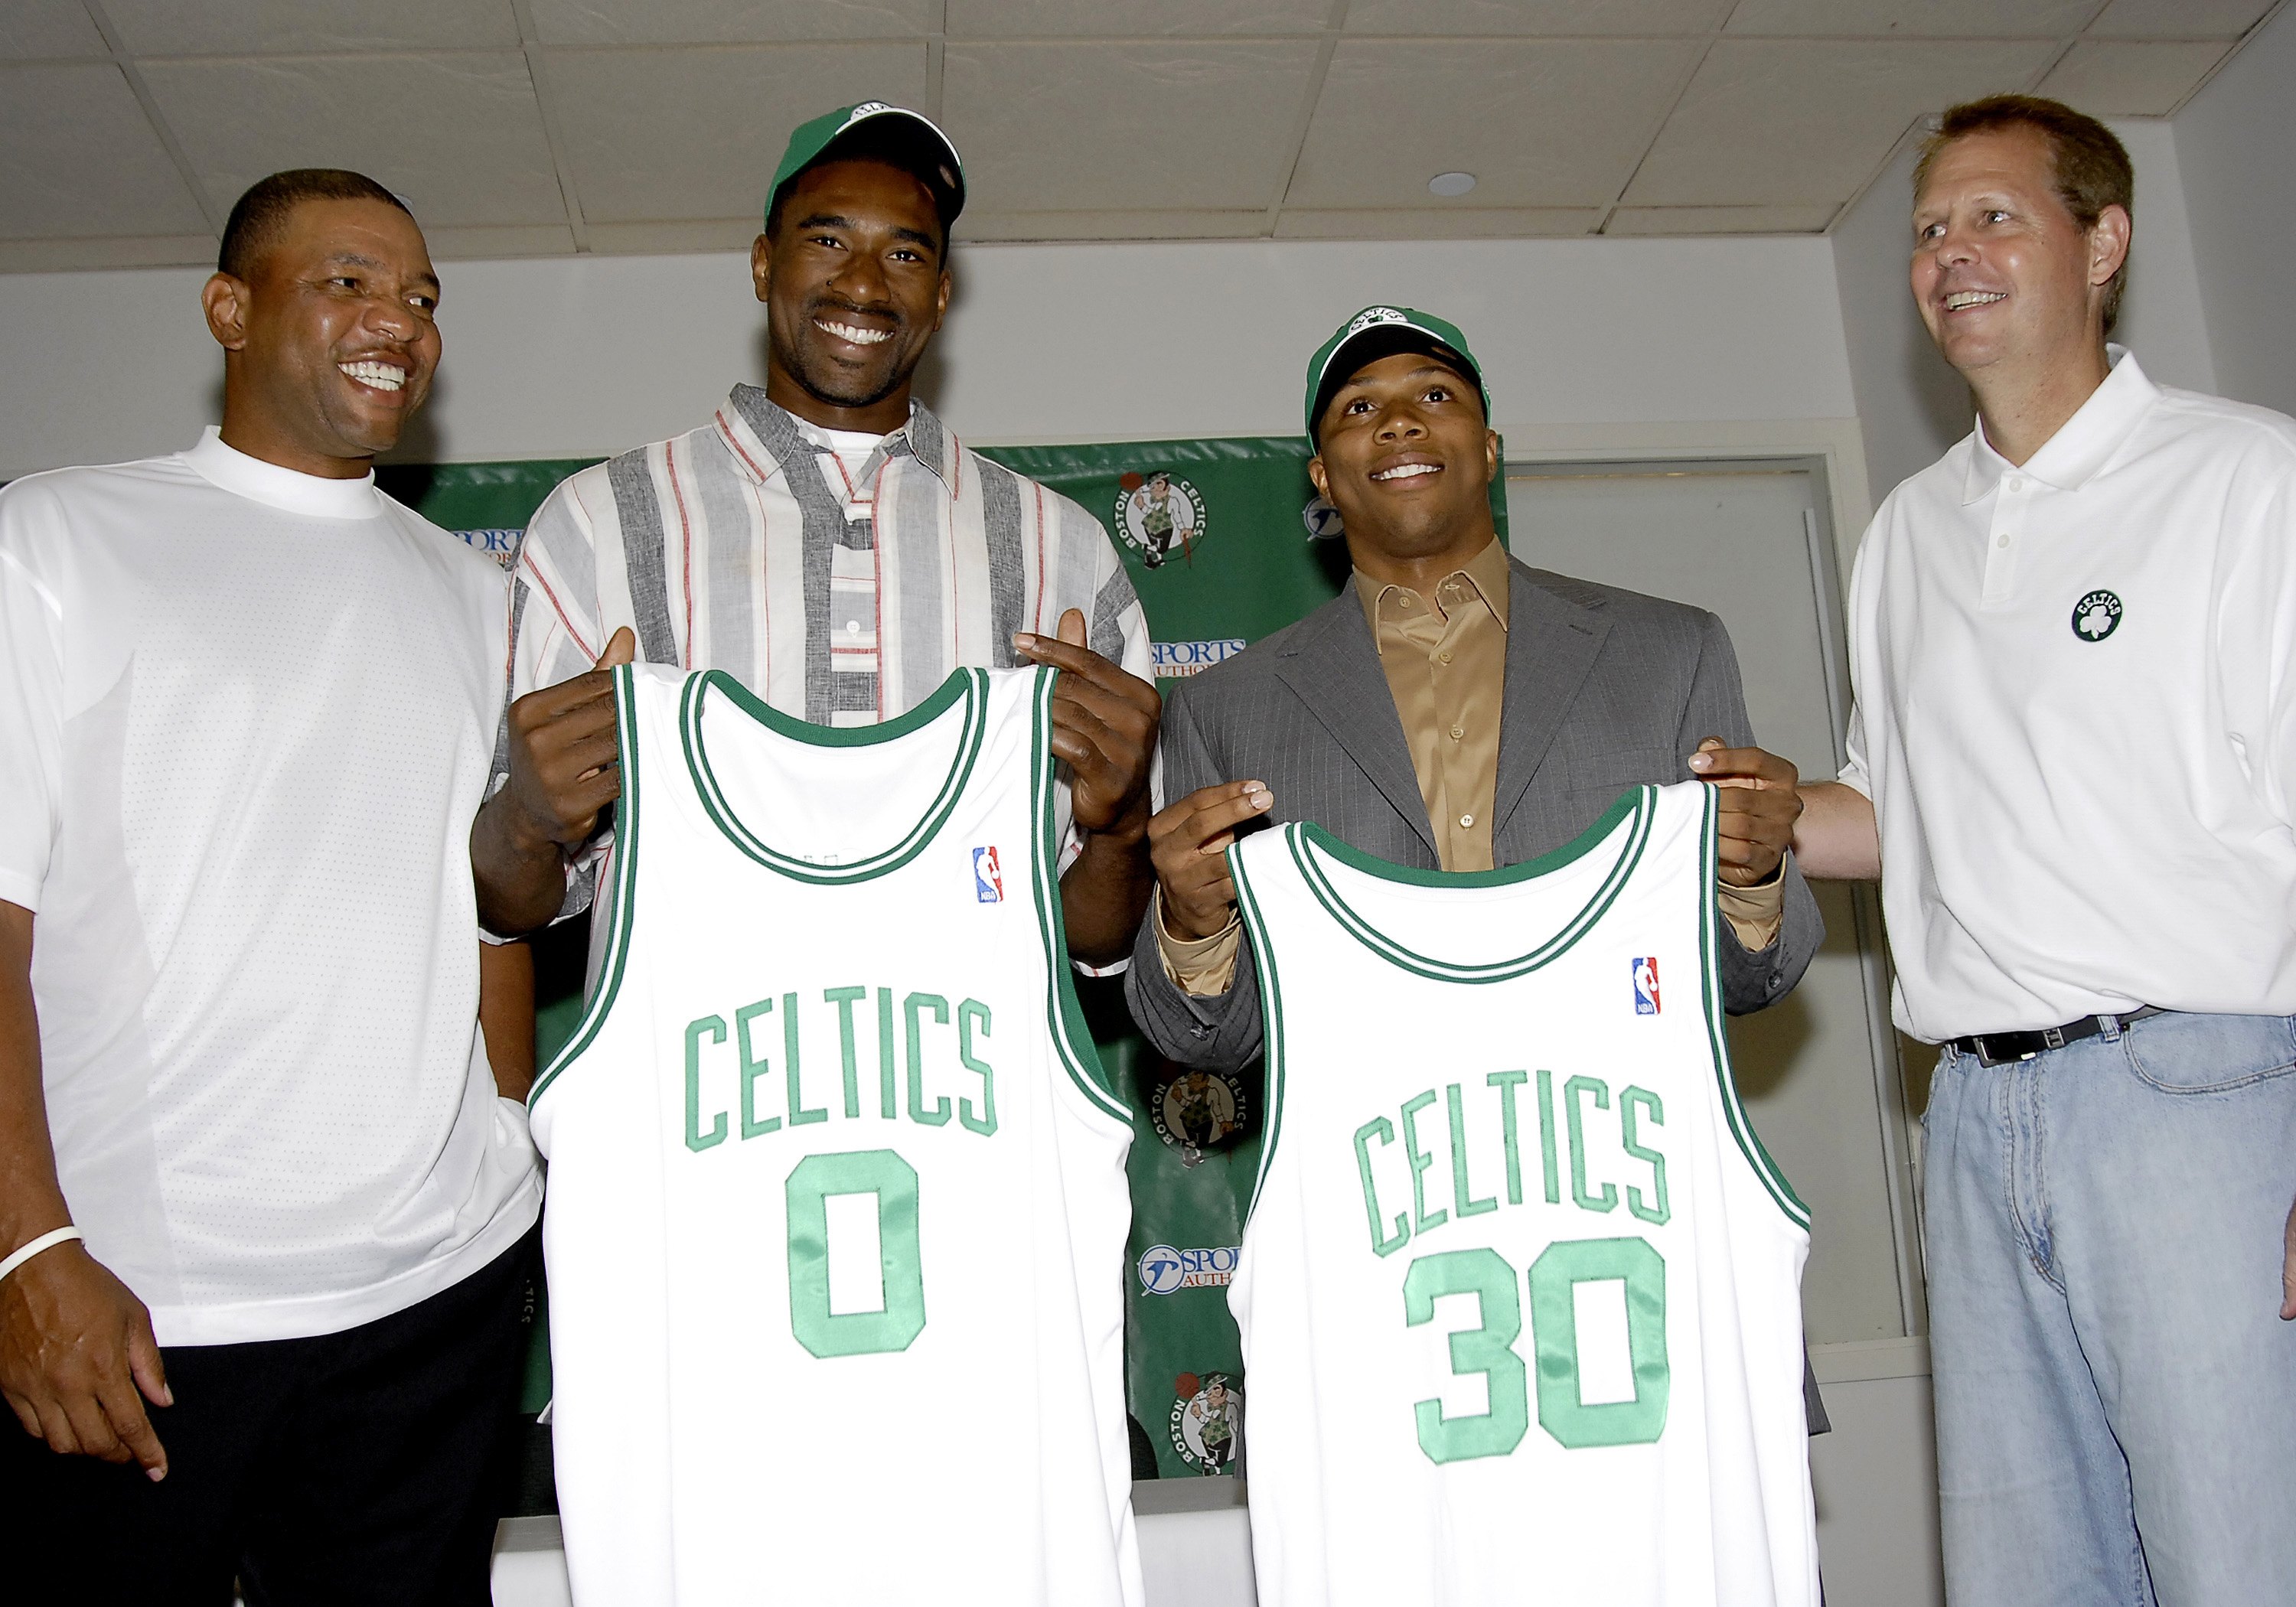 Doc Rivers and Danny Ainge pose with Sebastian Telfair and Leon Powe during a press conference in July 2006. (Photo by Brian Babineau/NBAE via Getty Images)